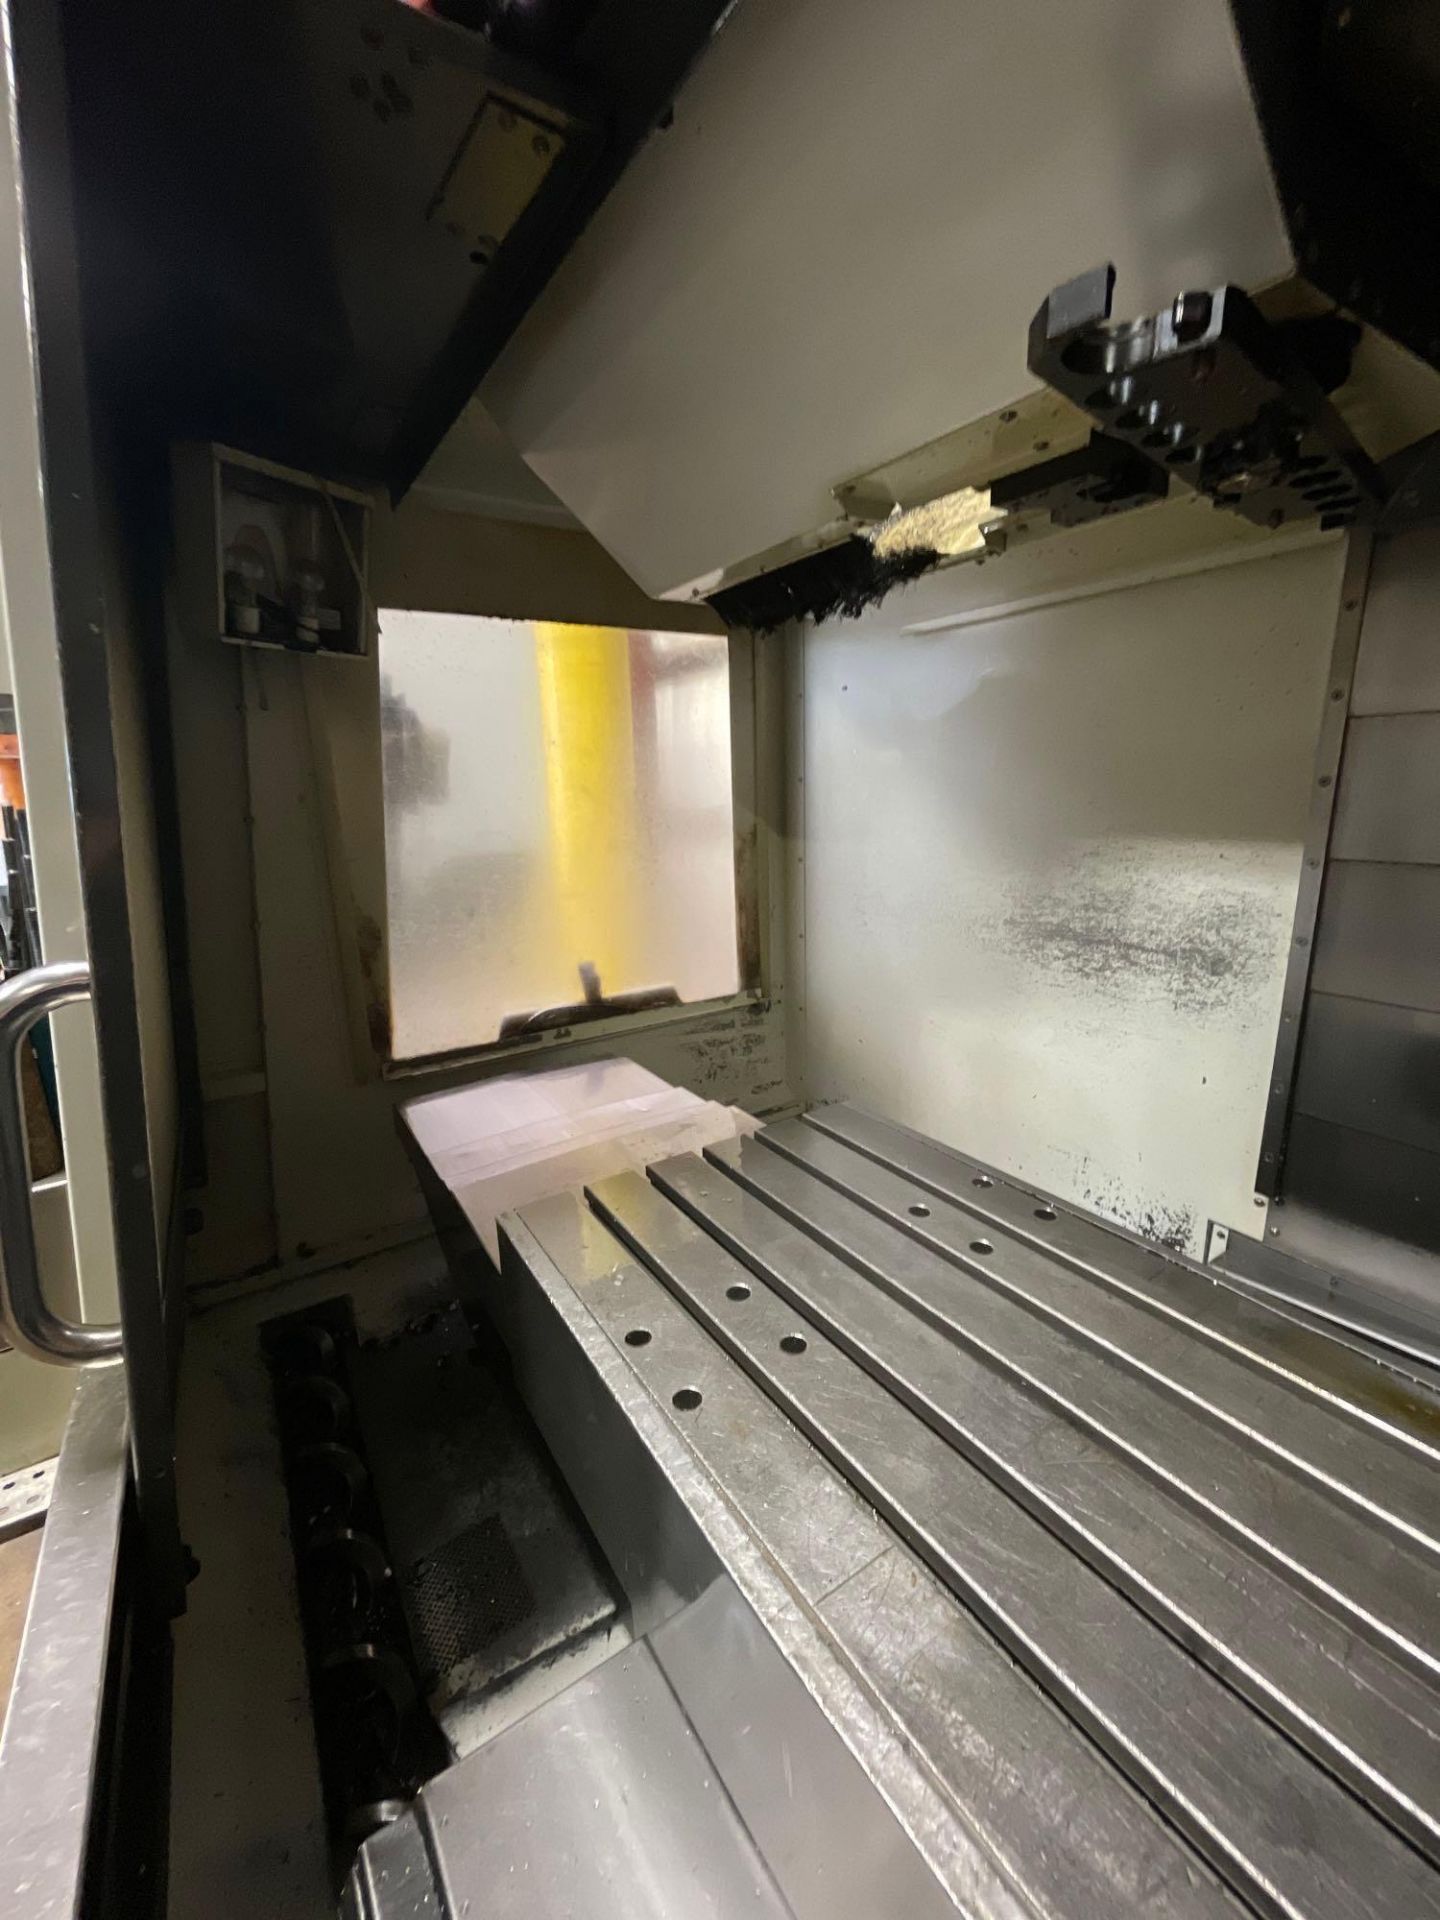 2011, Haas VF3 CNC Vertical Machining Center, VMC, S/N 1088411 - Image 15 of 26